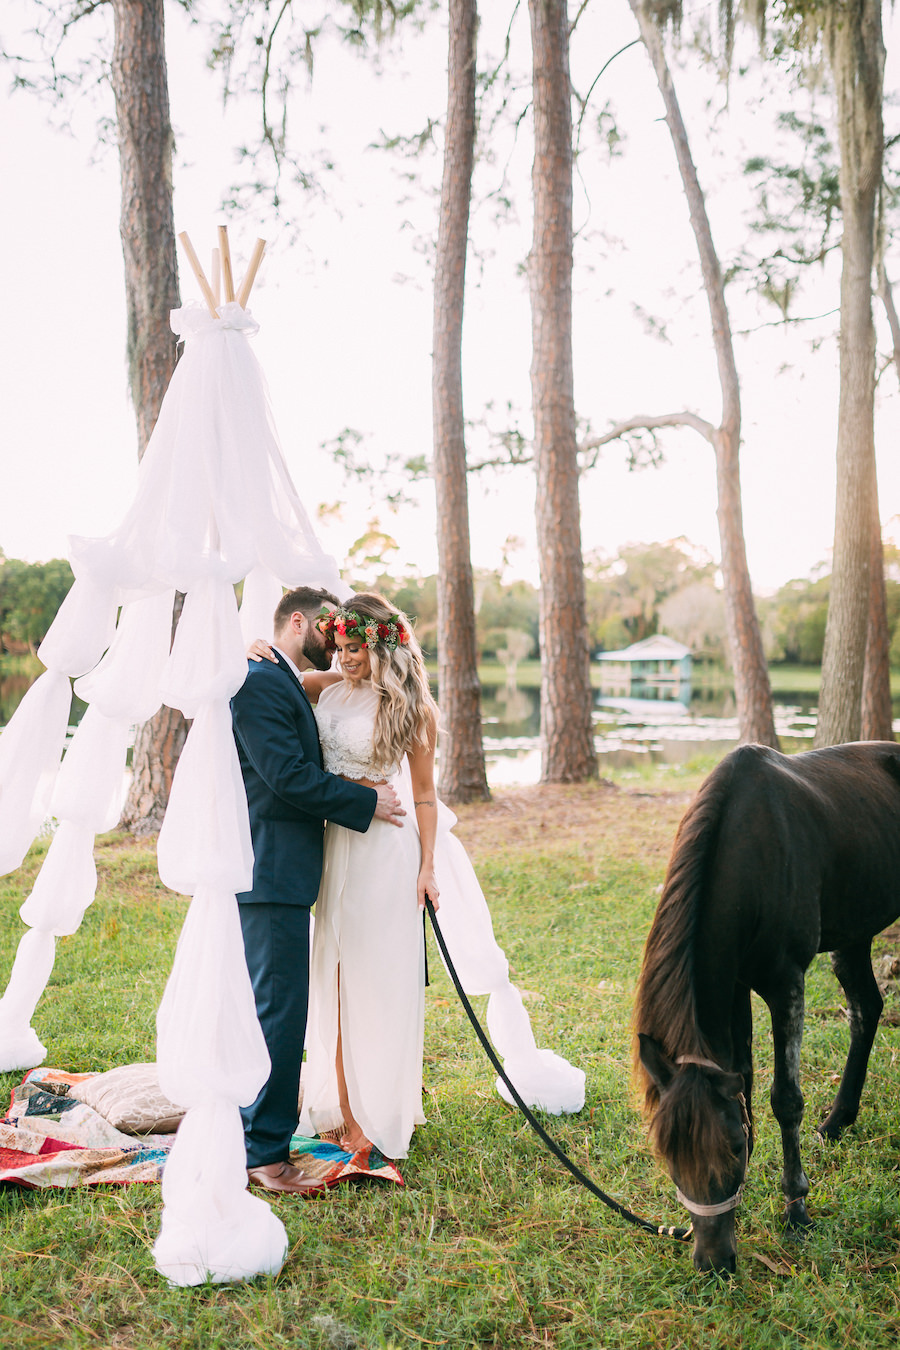 Boho Chic Wedding Portrait with Flower Crown and Horse Rustic Tampa Bay Wedding Venue The Barn at Crescent Lake at Old McMicky's Farm